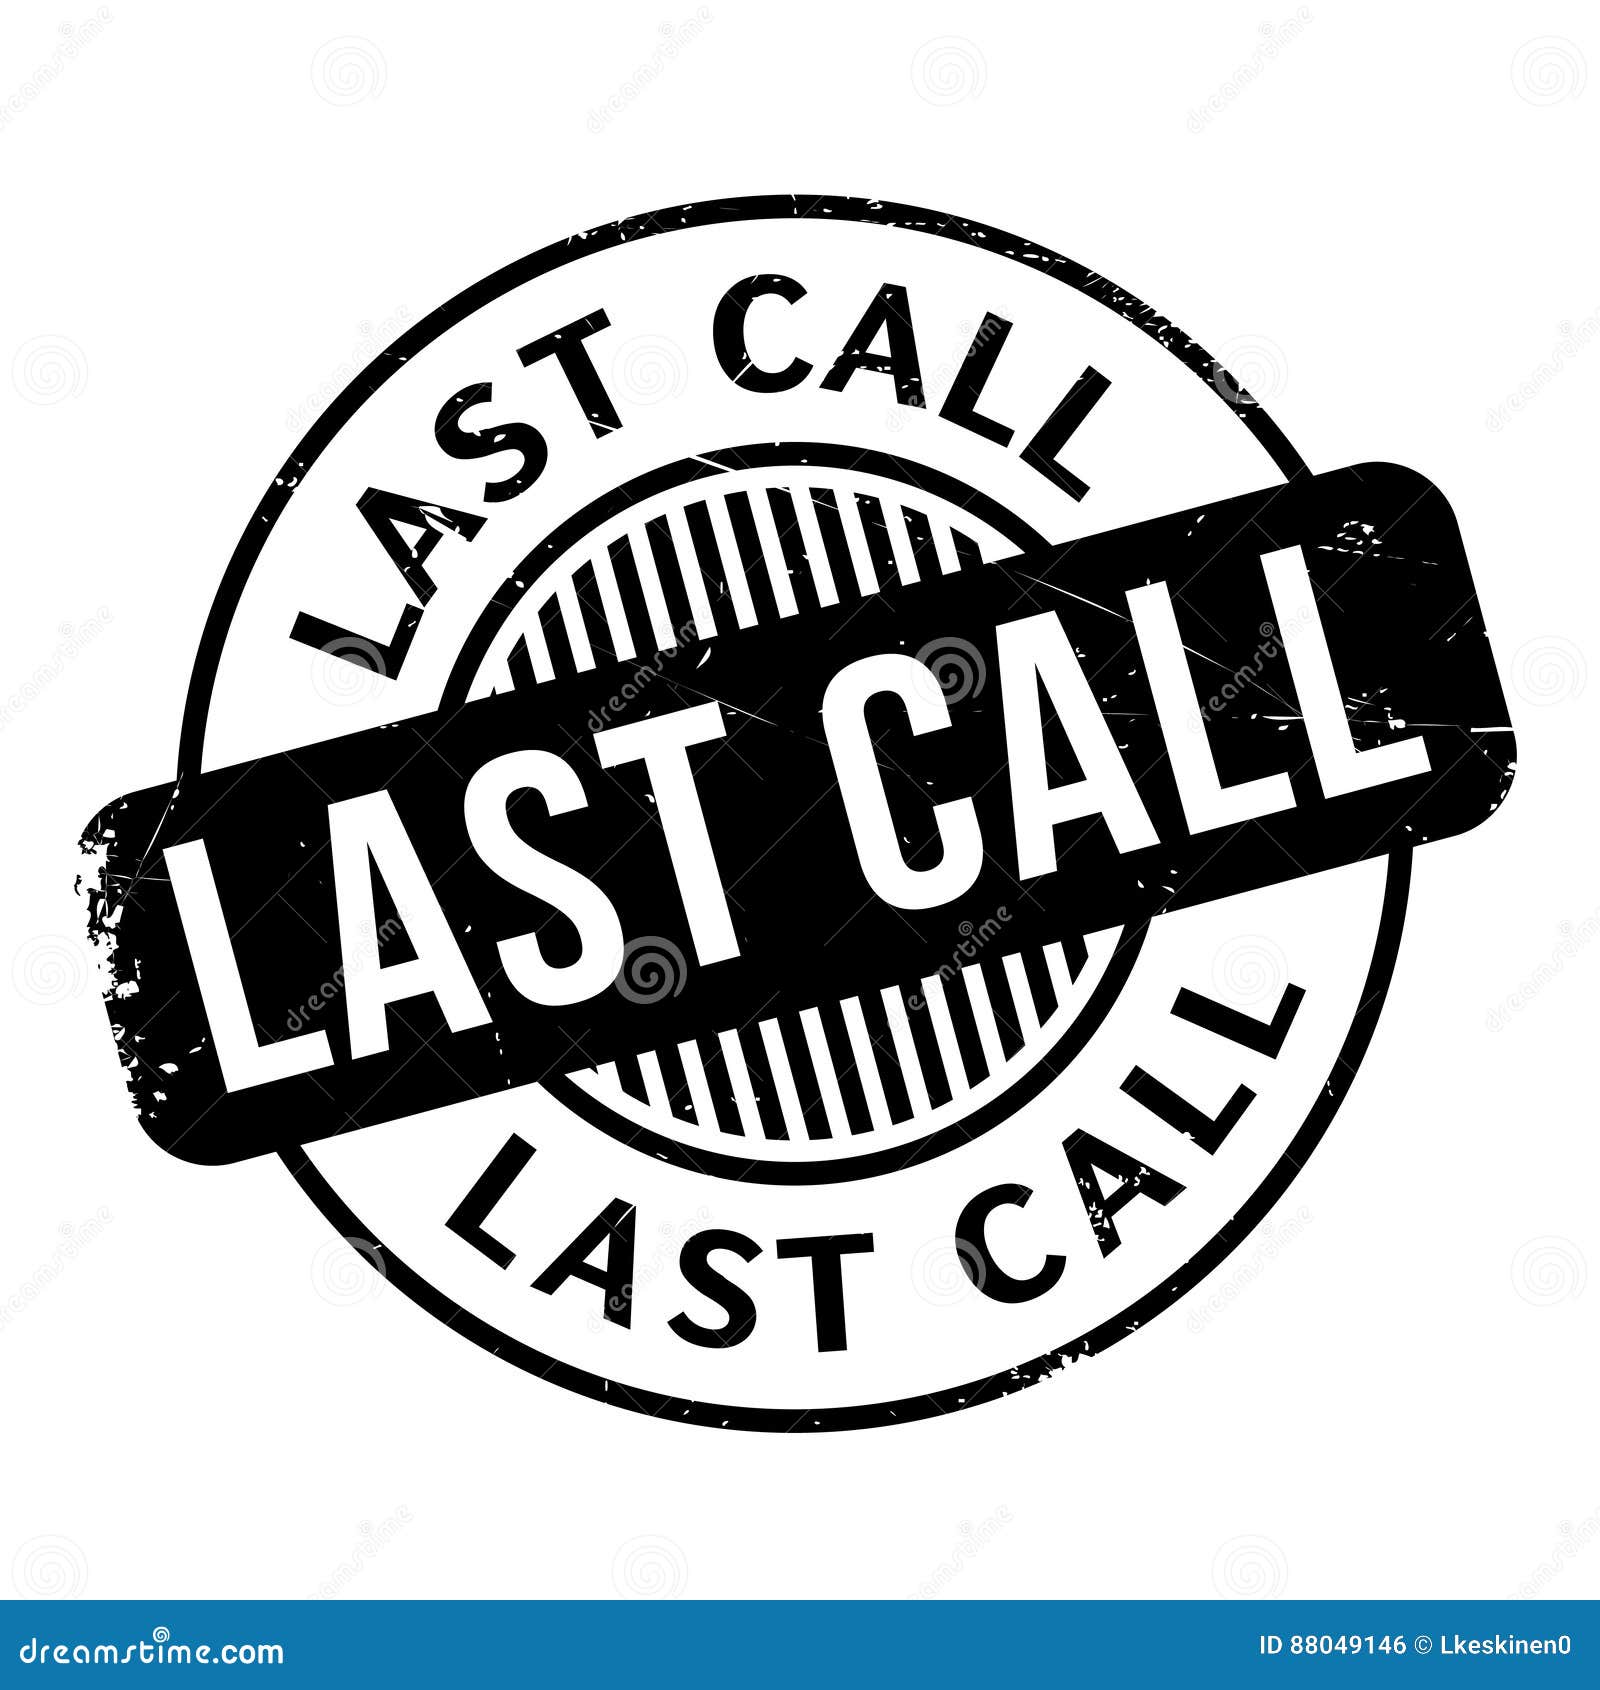 last call rubber stamp